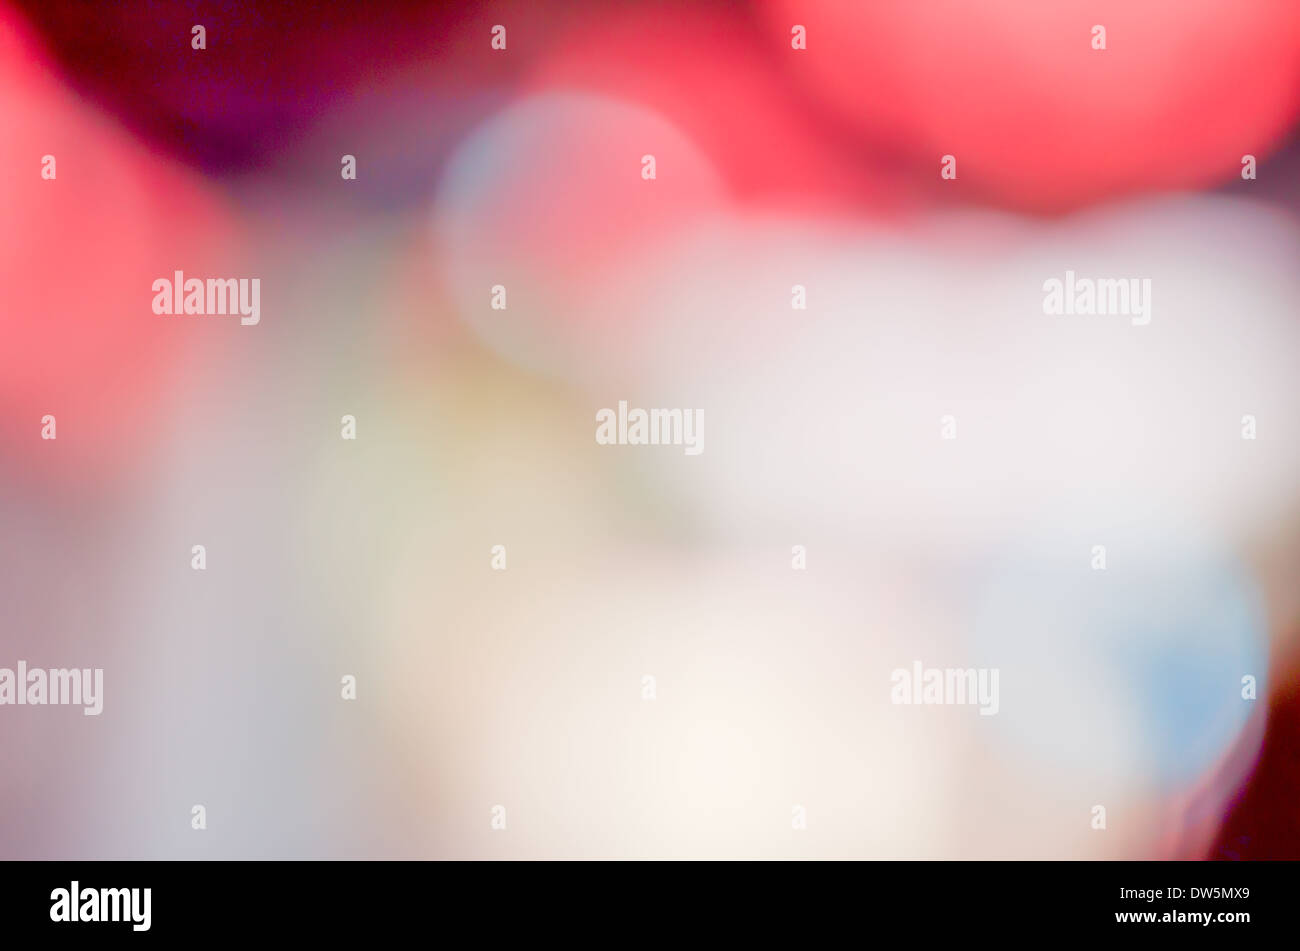 Artistic style - Defocused abstract texture background for your design Stock Photo